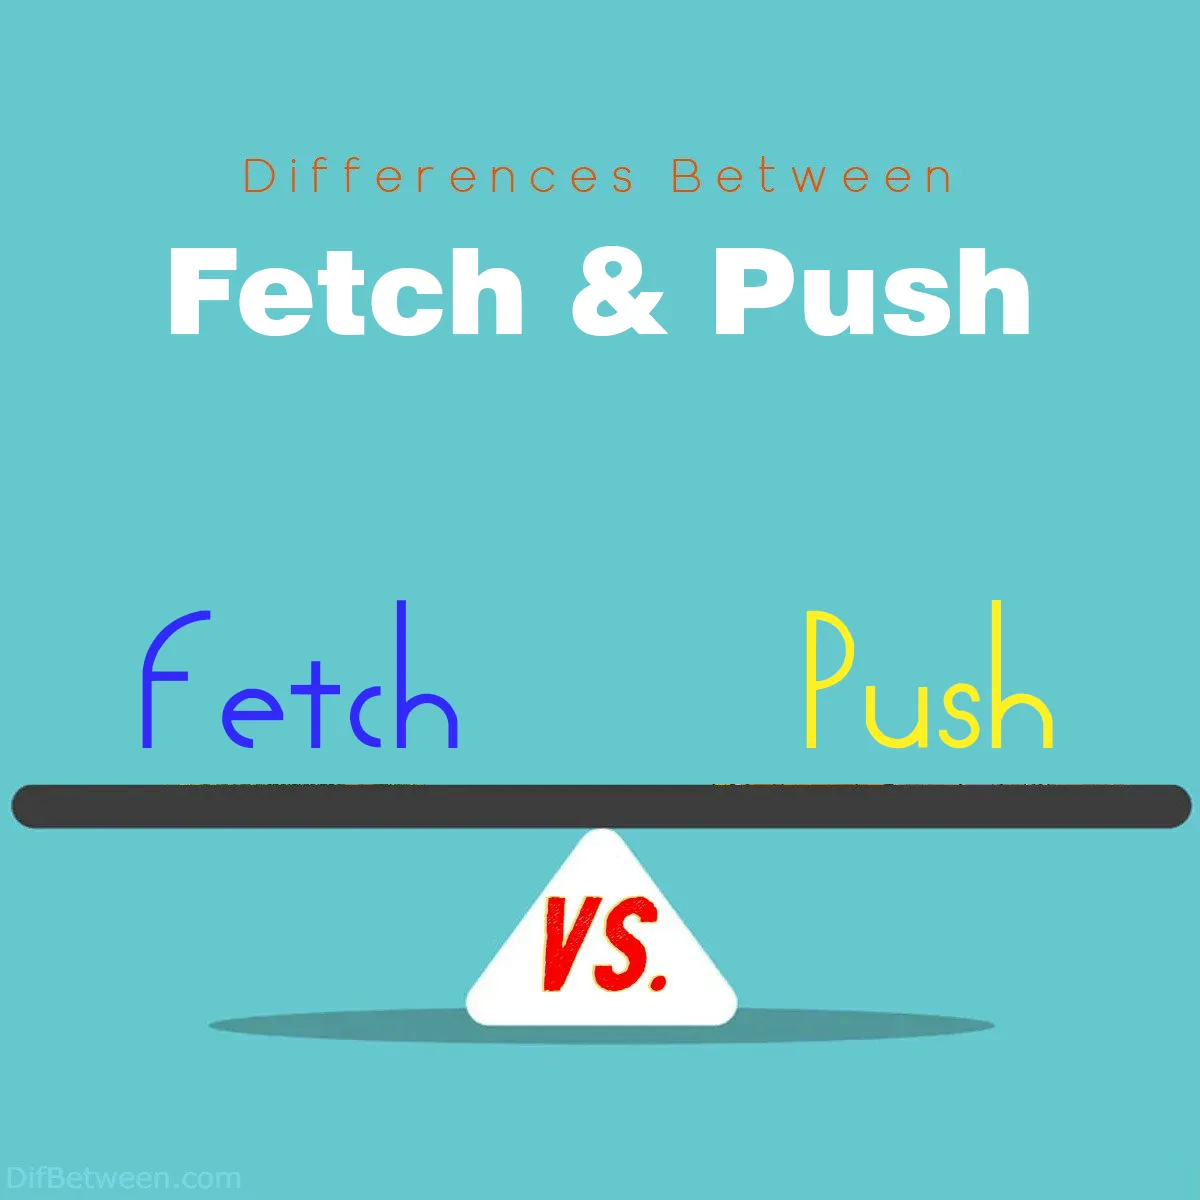 Differences Between Fetch and Push